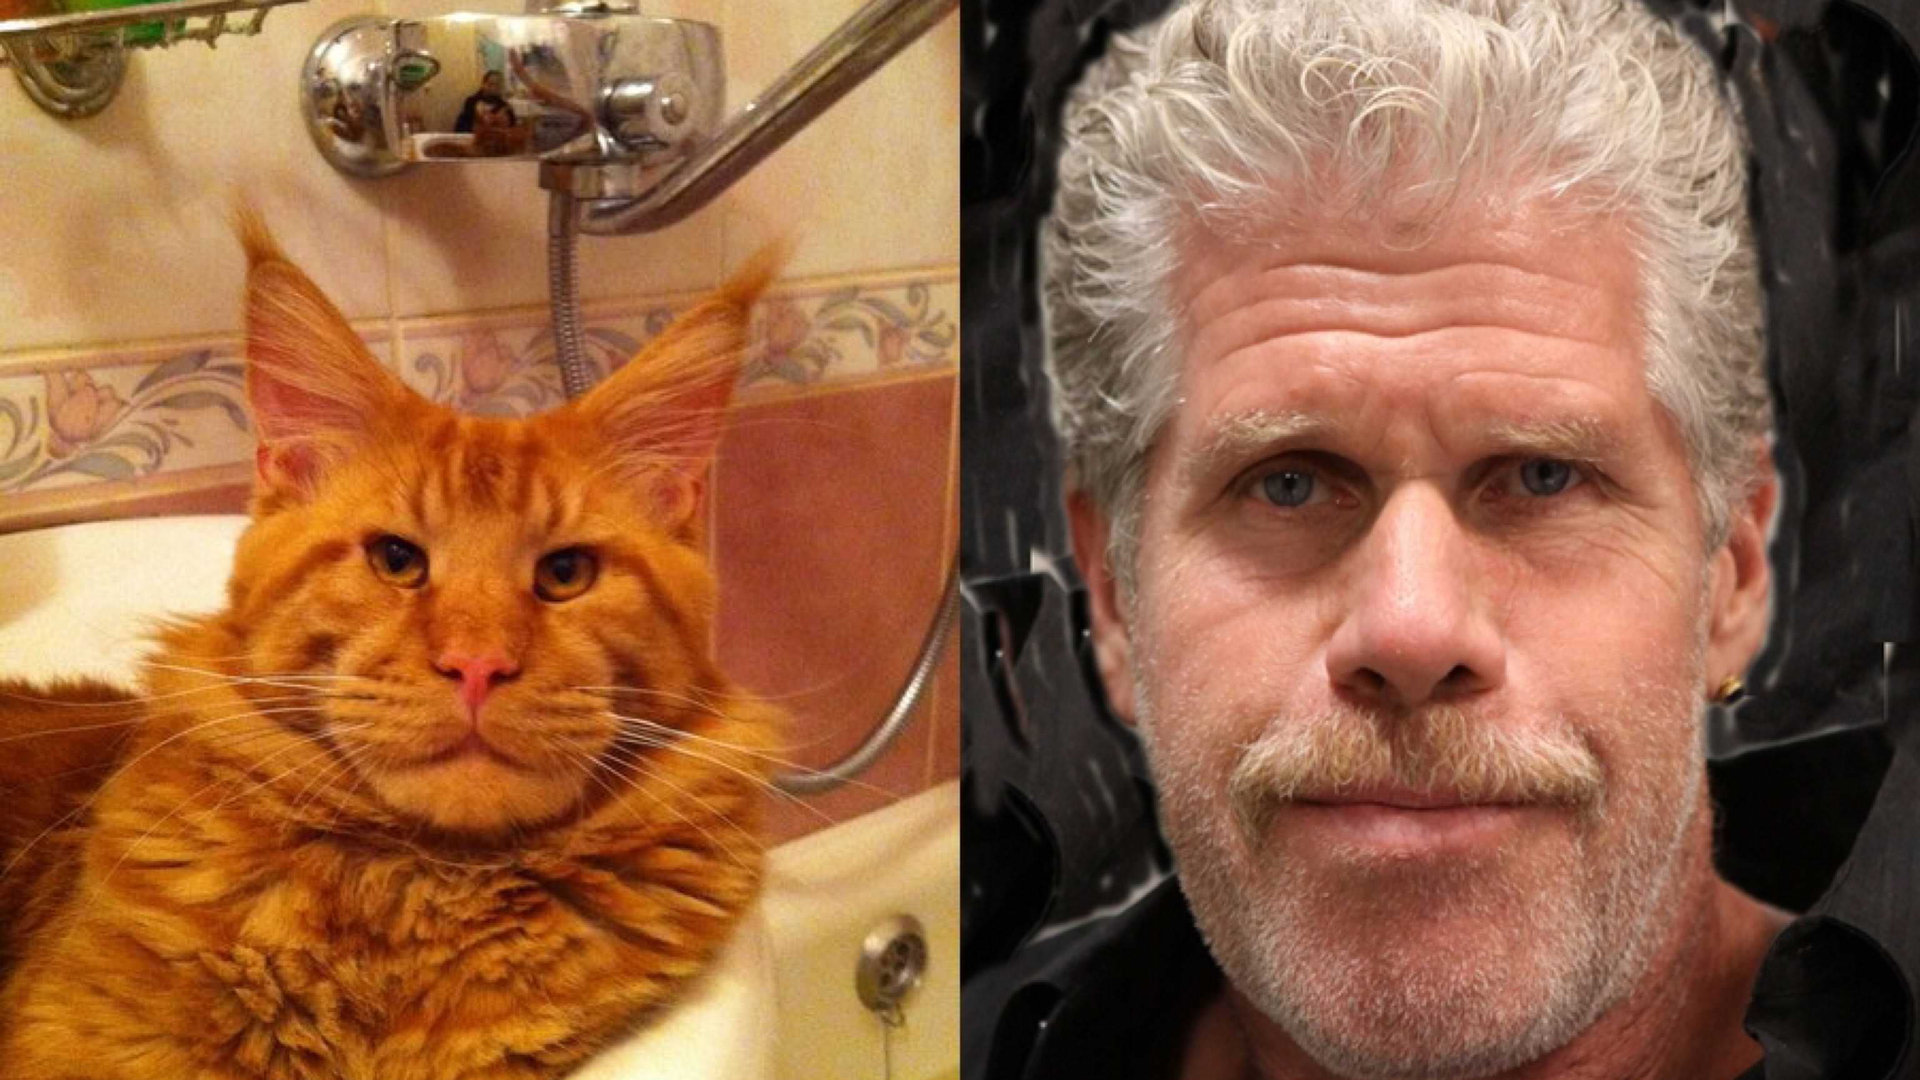 Ron Perlman and the Maine Coon